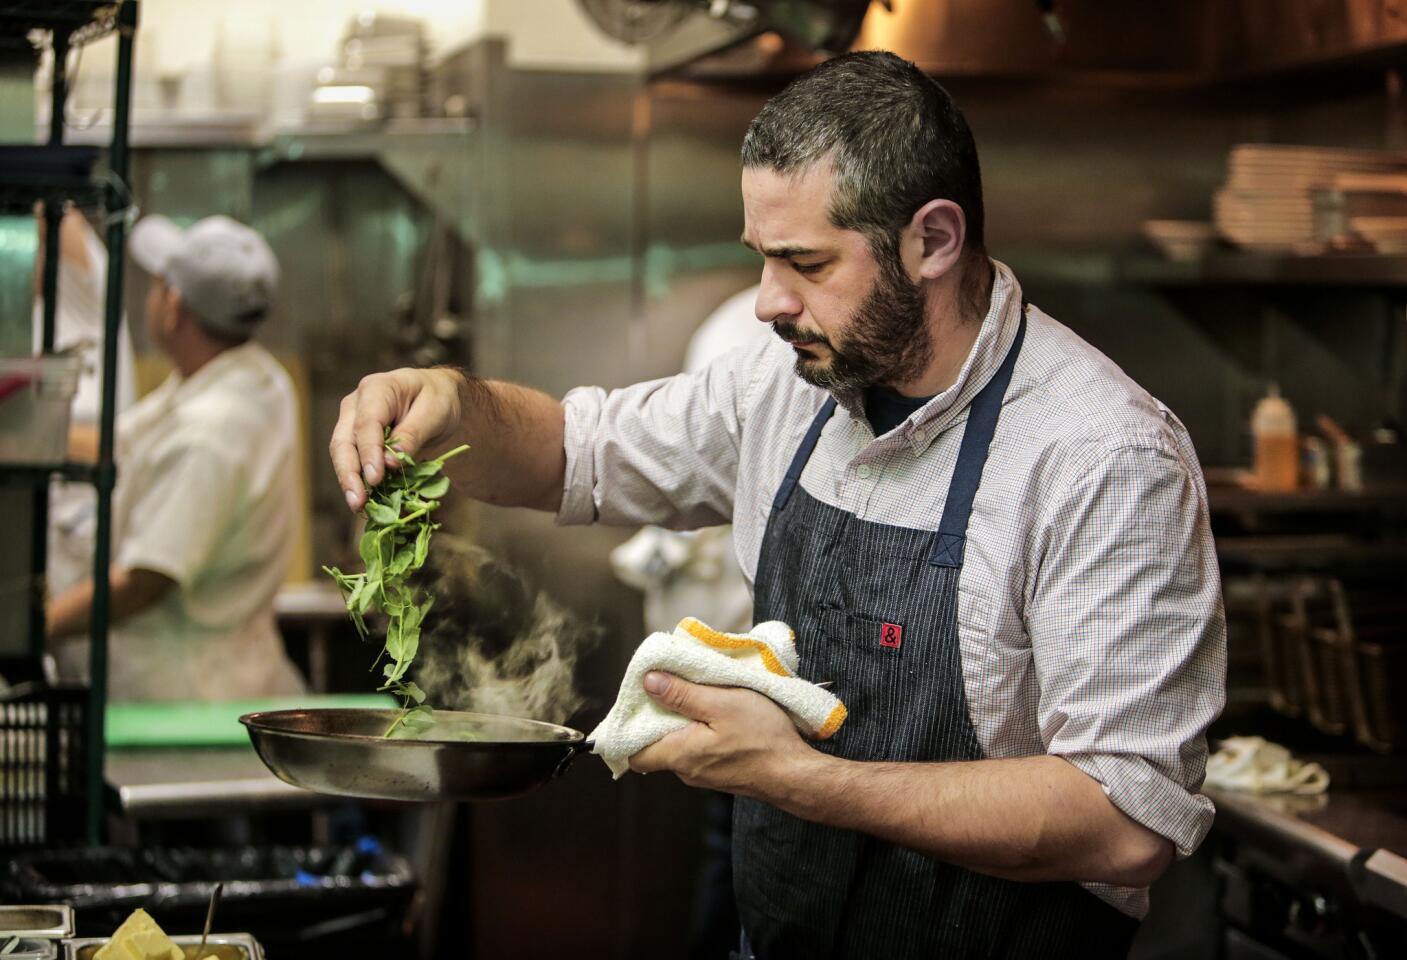 Chef Jeremy Fox of Rustic Canyon in Santa Monica is focusing on making dishes with ingredients that are more sustainable. Here, Fox prepares McGrath Family Farms broccoli di cicco.